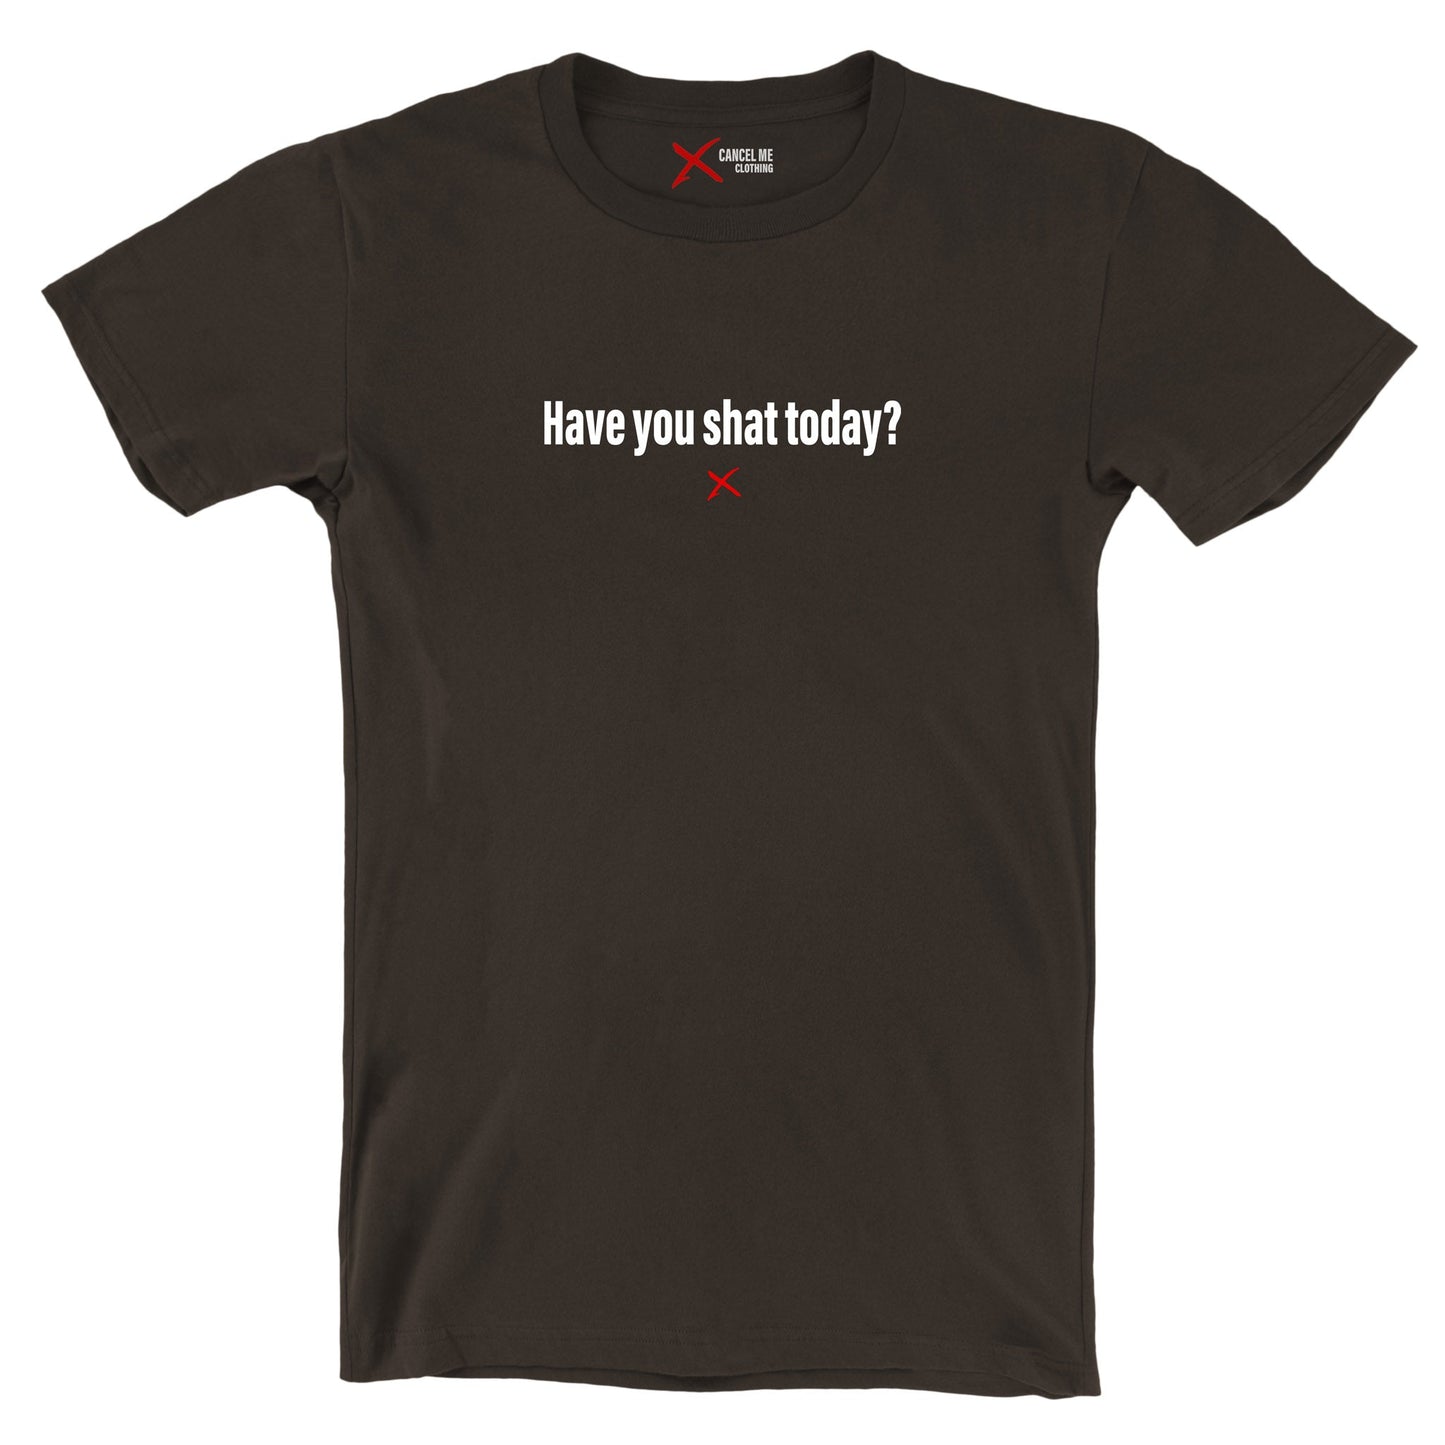 Have you shat today? - Shirt